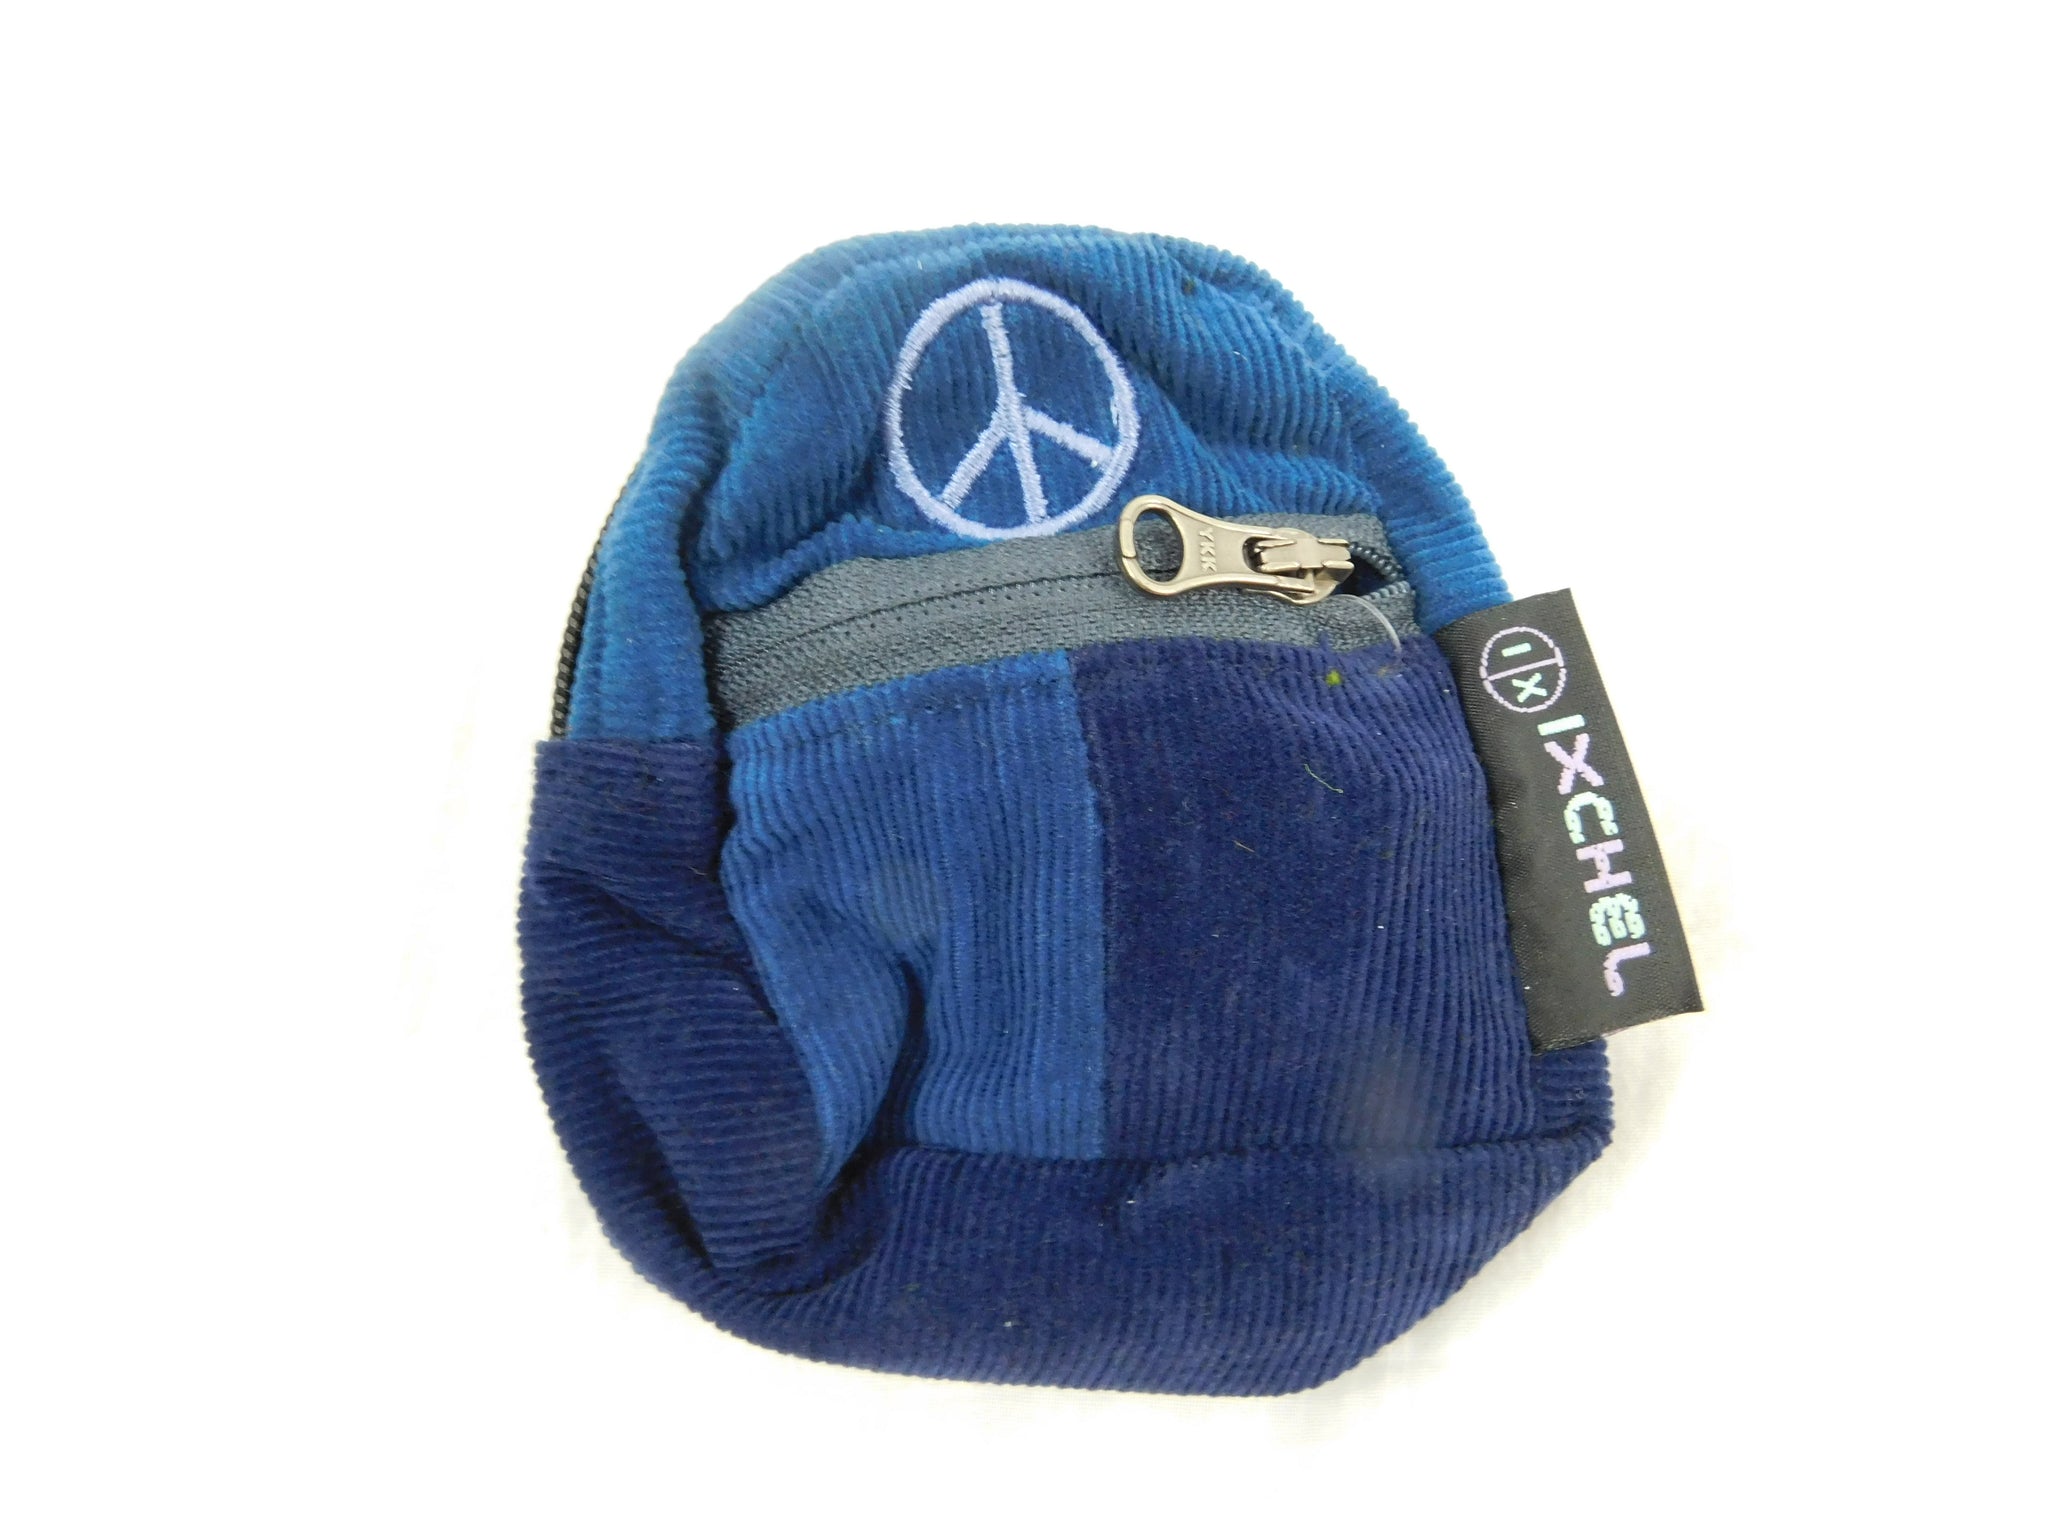 patctchwork corduroy micro Backpack with peace sign Embroidery